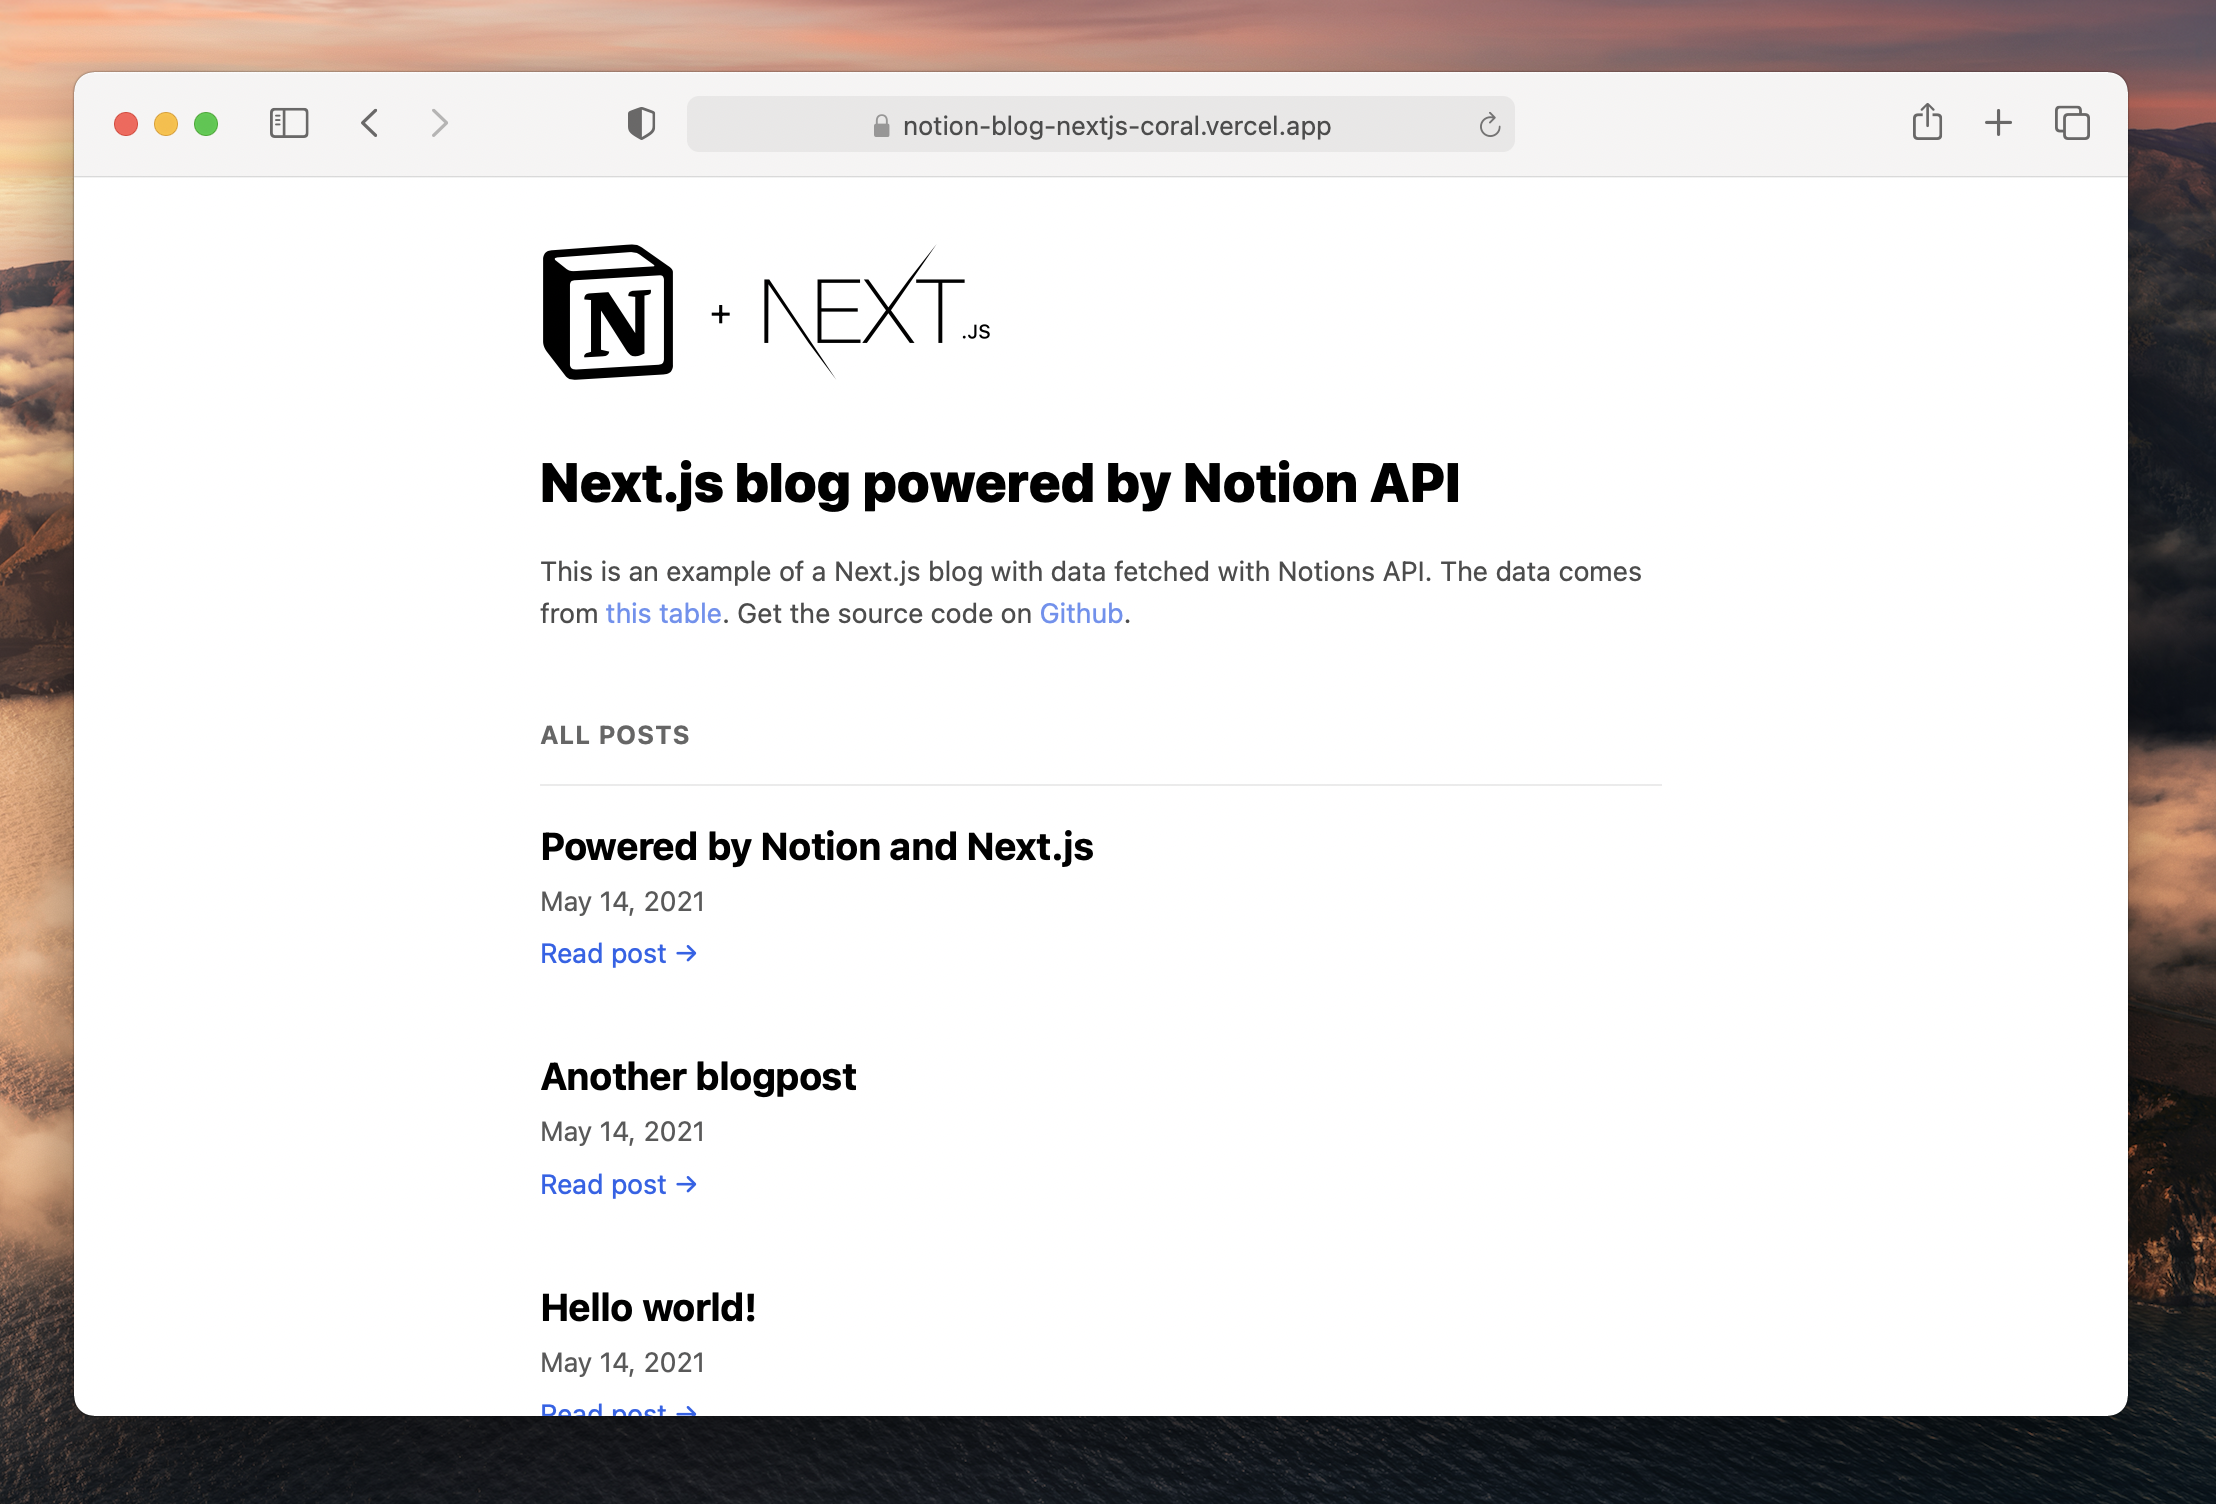 Blog powered by Notion and Next.js